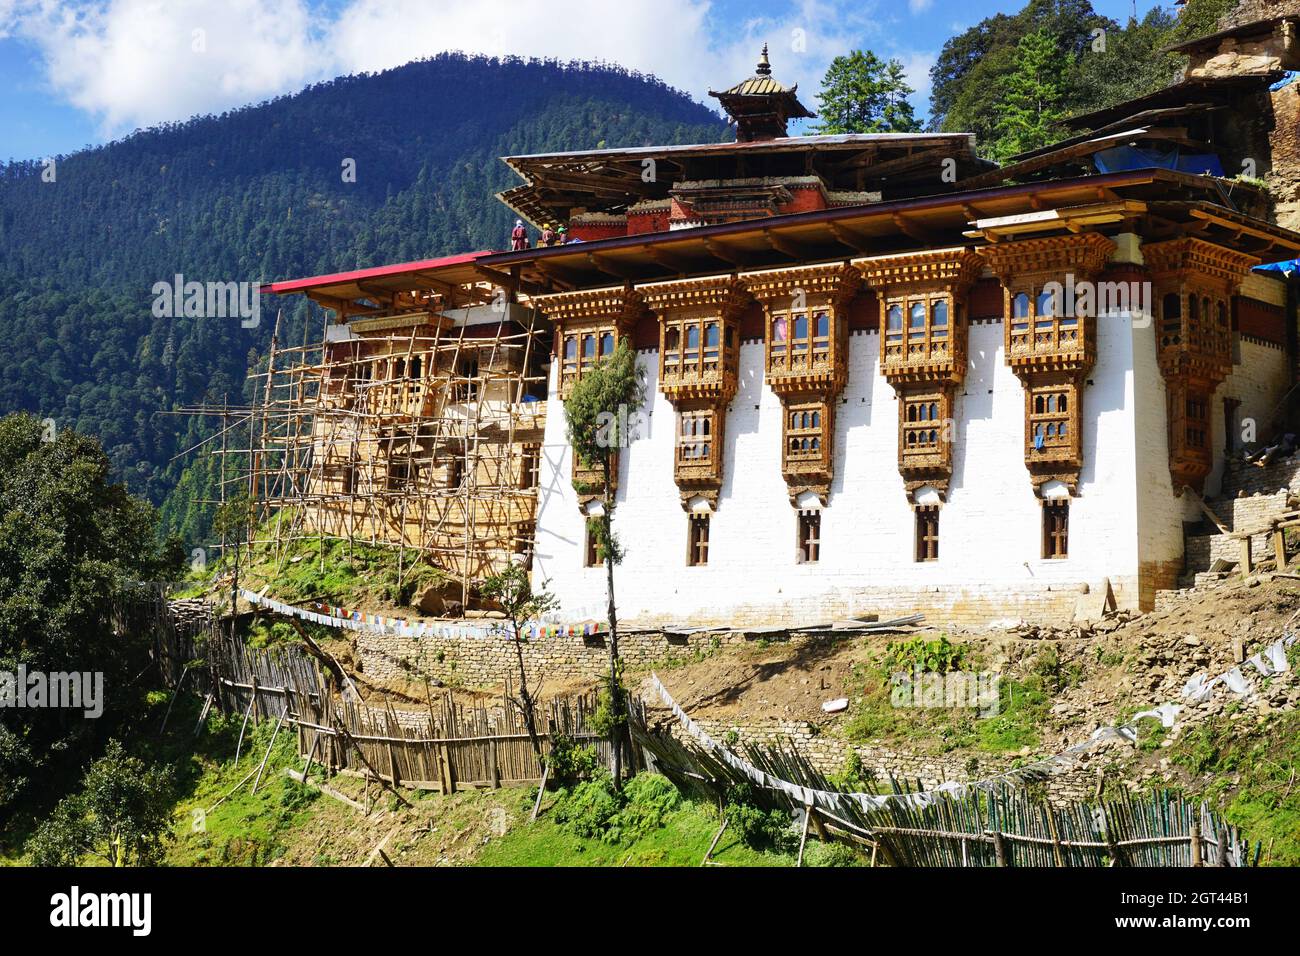 Bhutan’s Chagri Dorjeden Monastery, also called Cheri Dorji Dhen, with scaffolding in place for extensive repairs due to damage from a landslide. Stock Photo